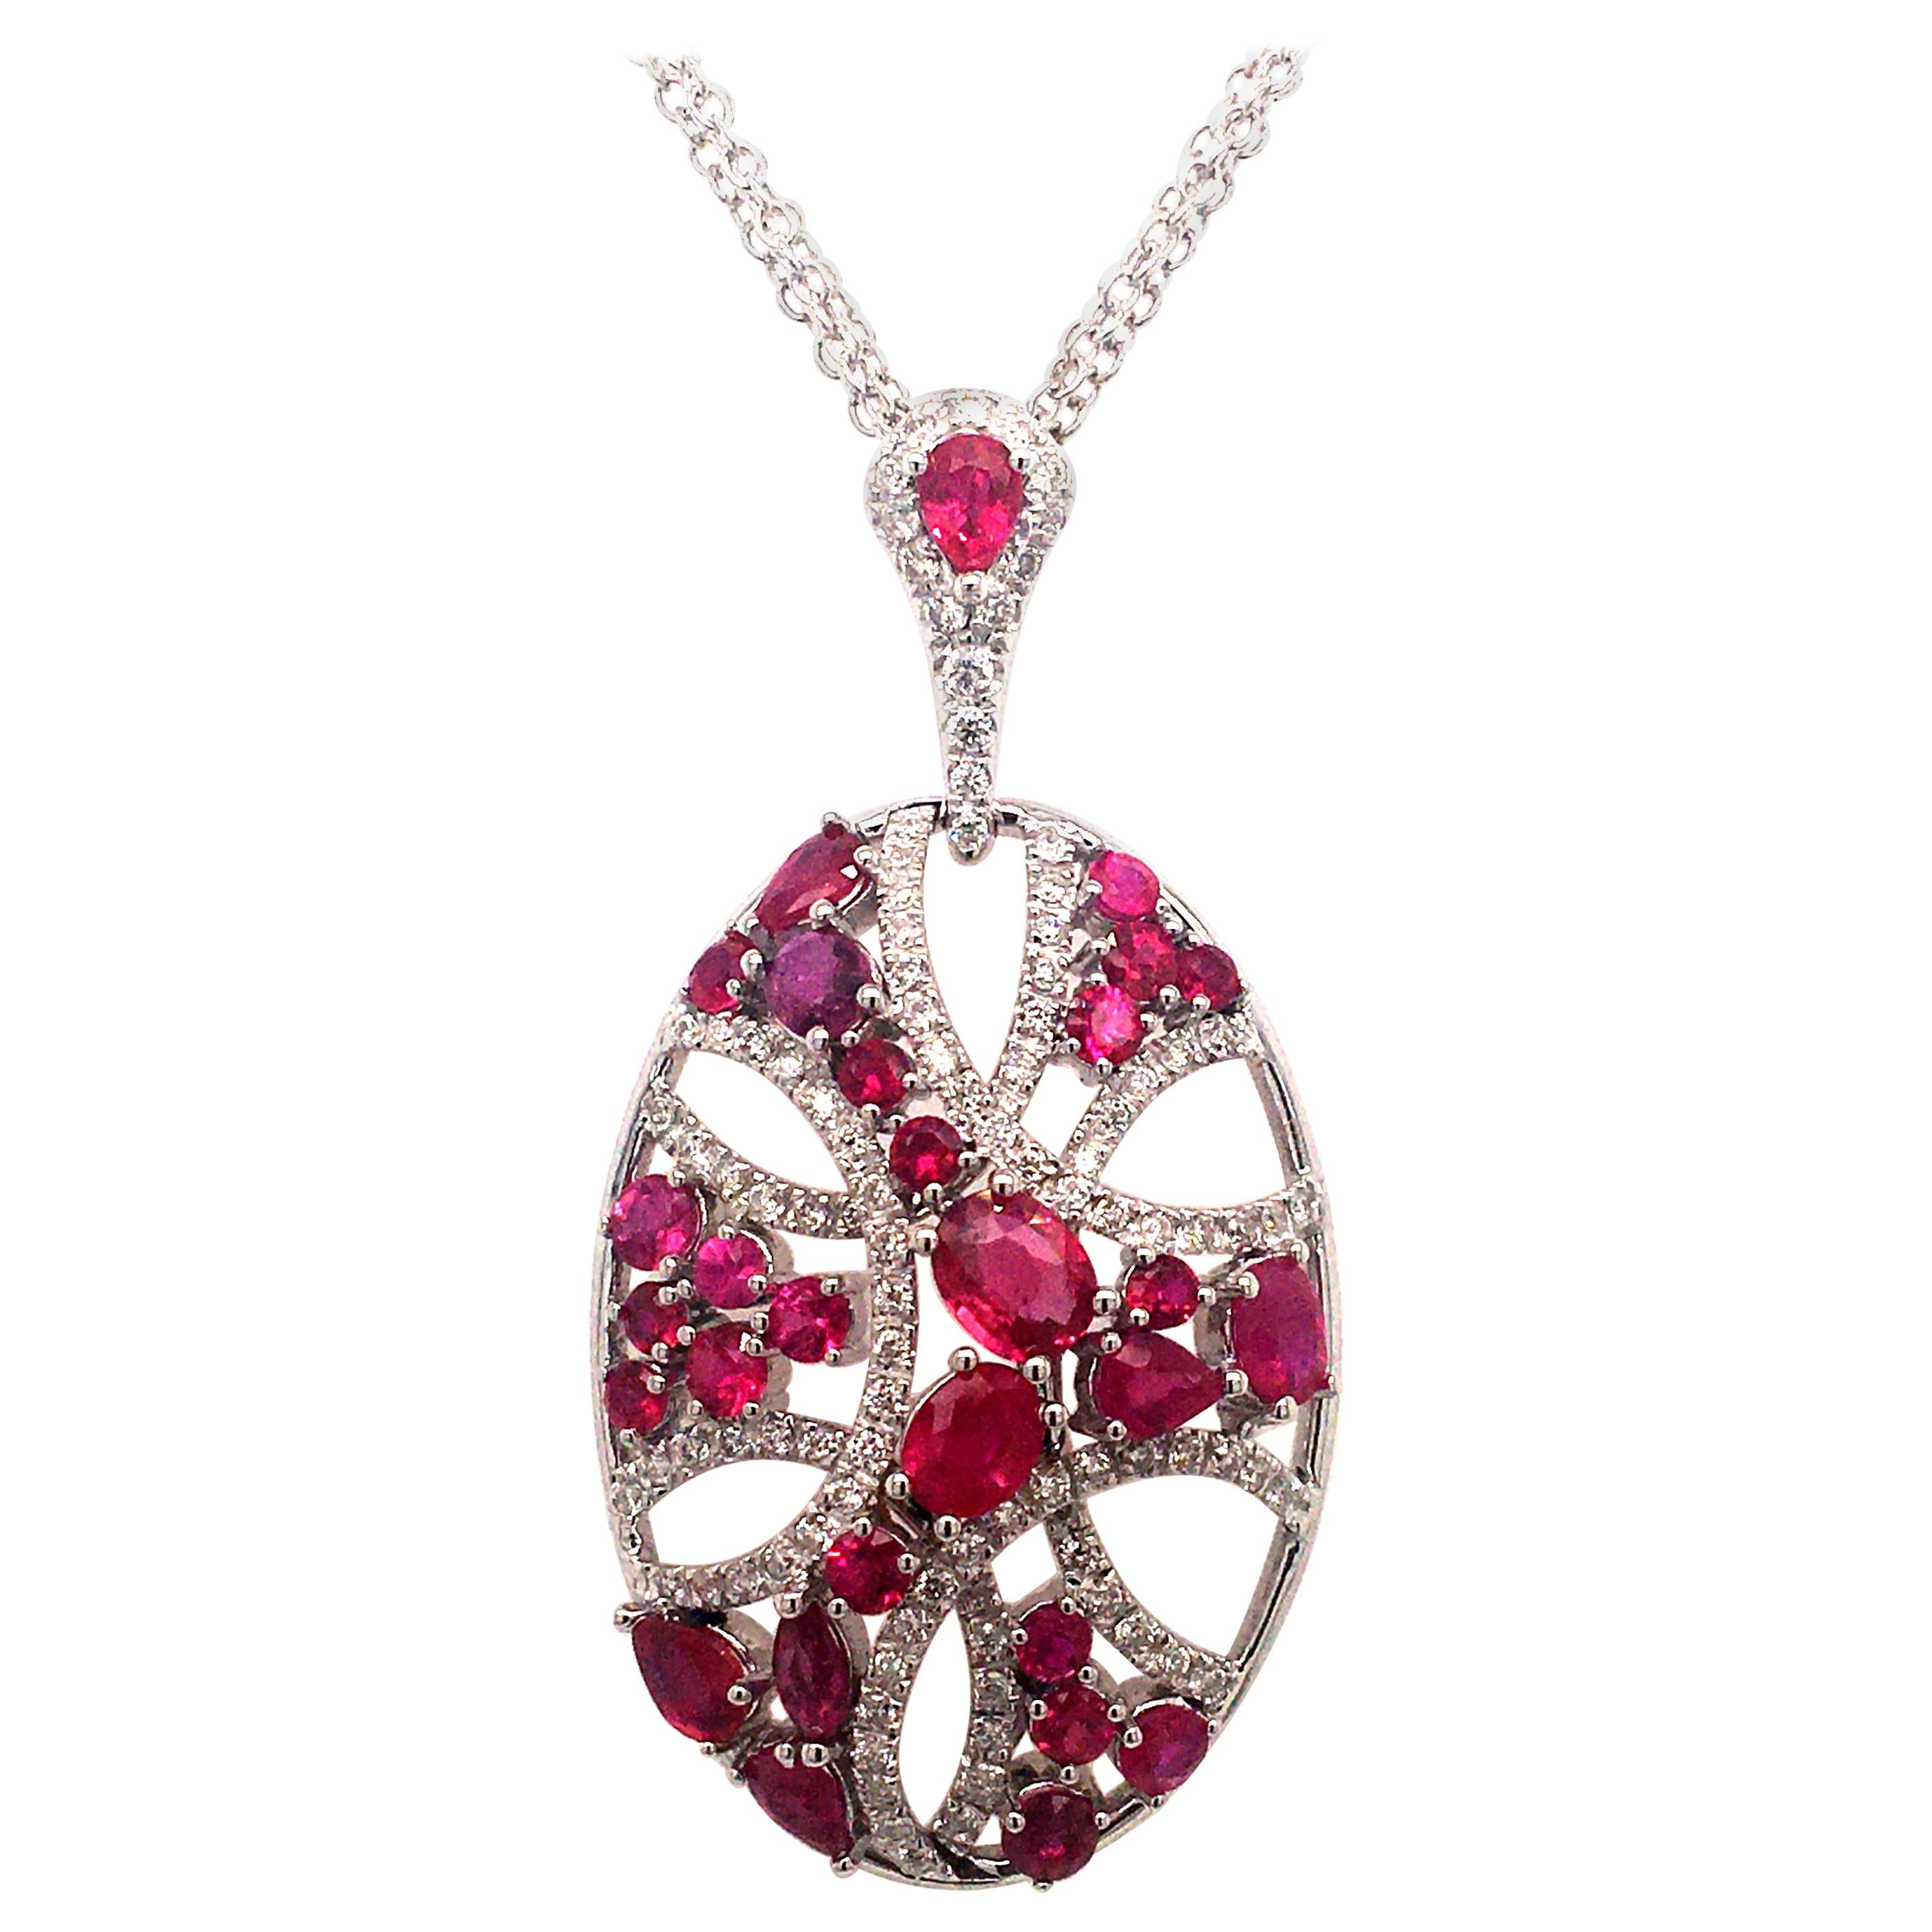 18 Karat White Gold Pendent Set with Diamonds and Ruby Made in Italy